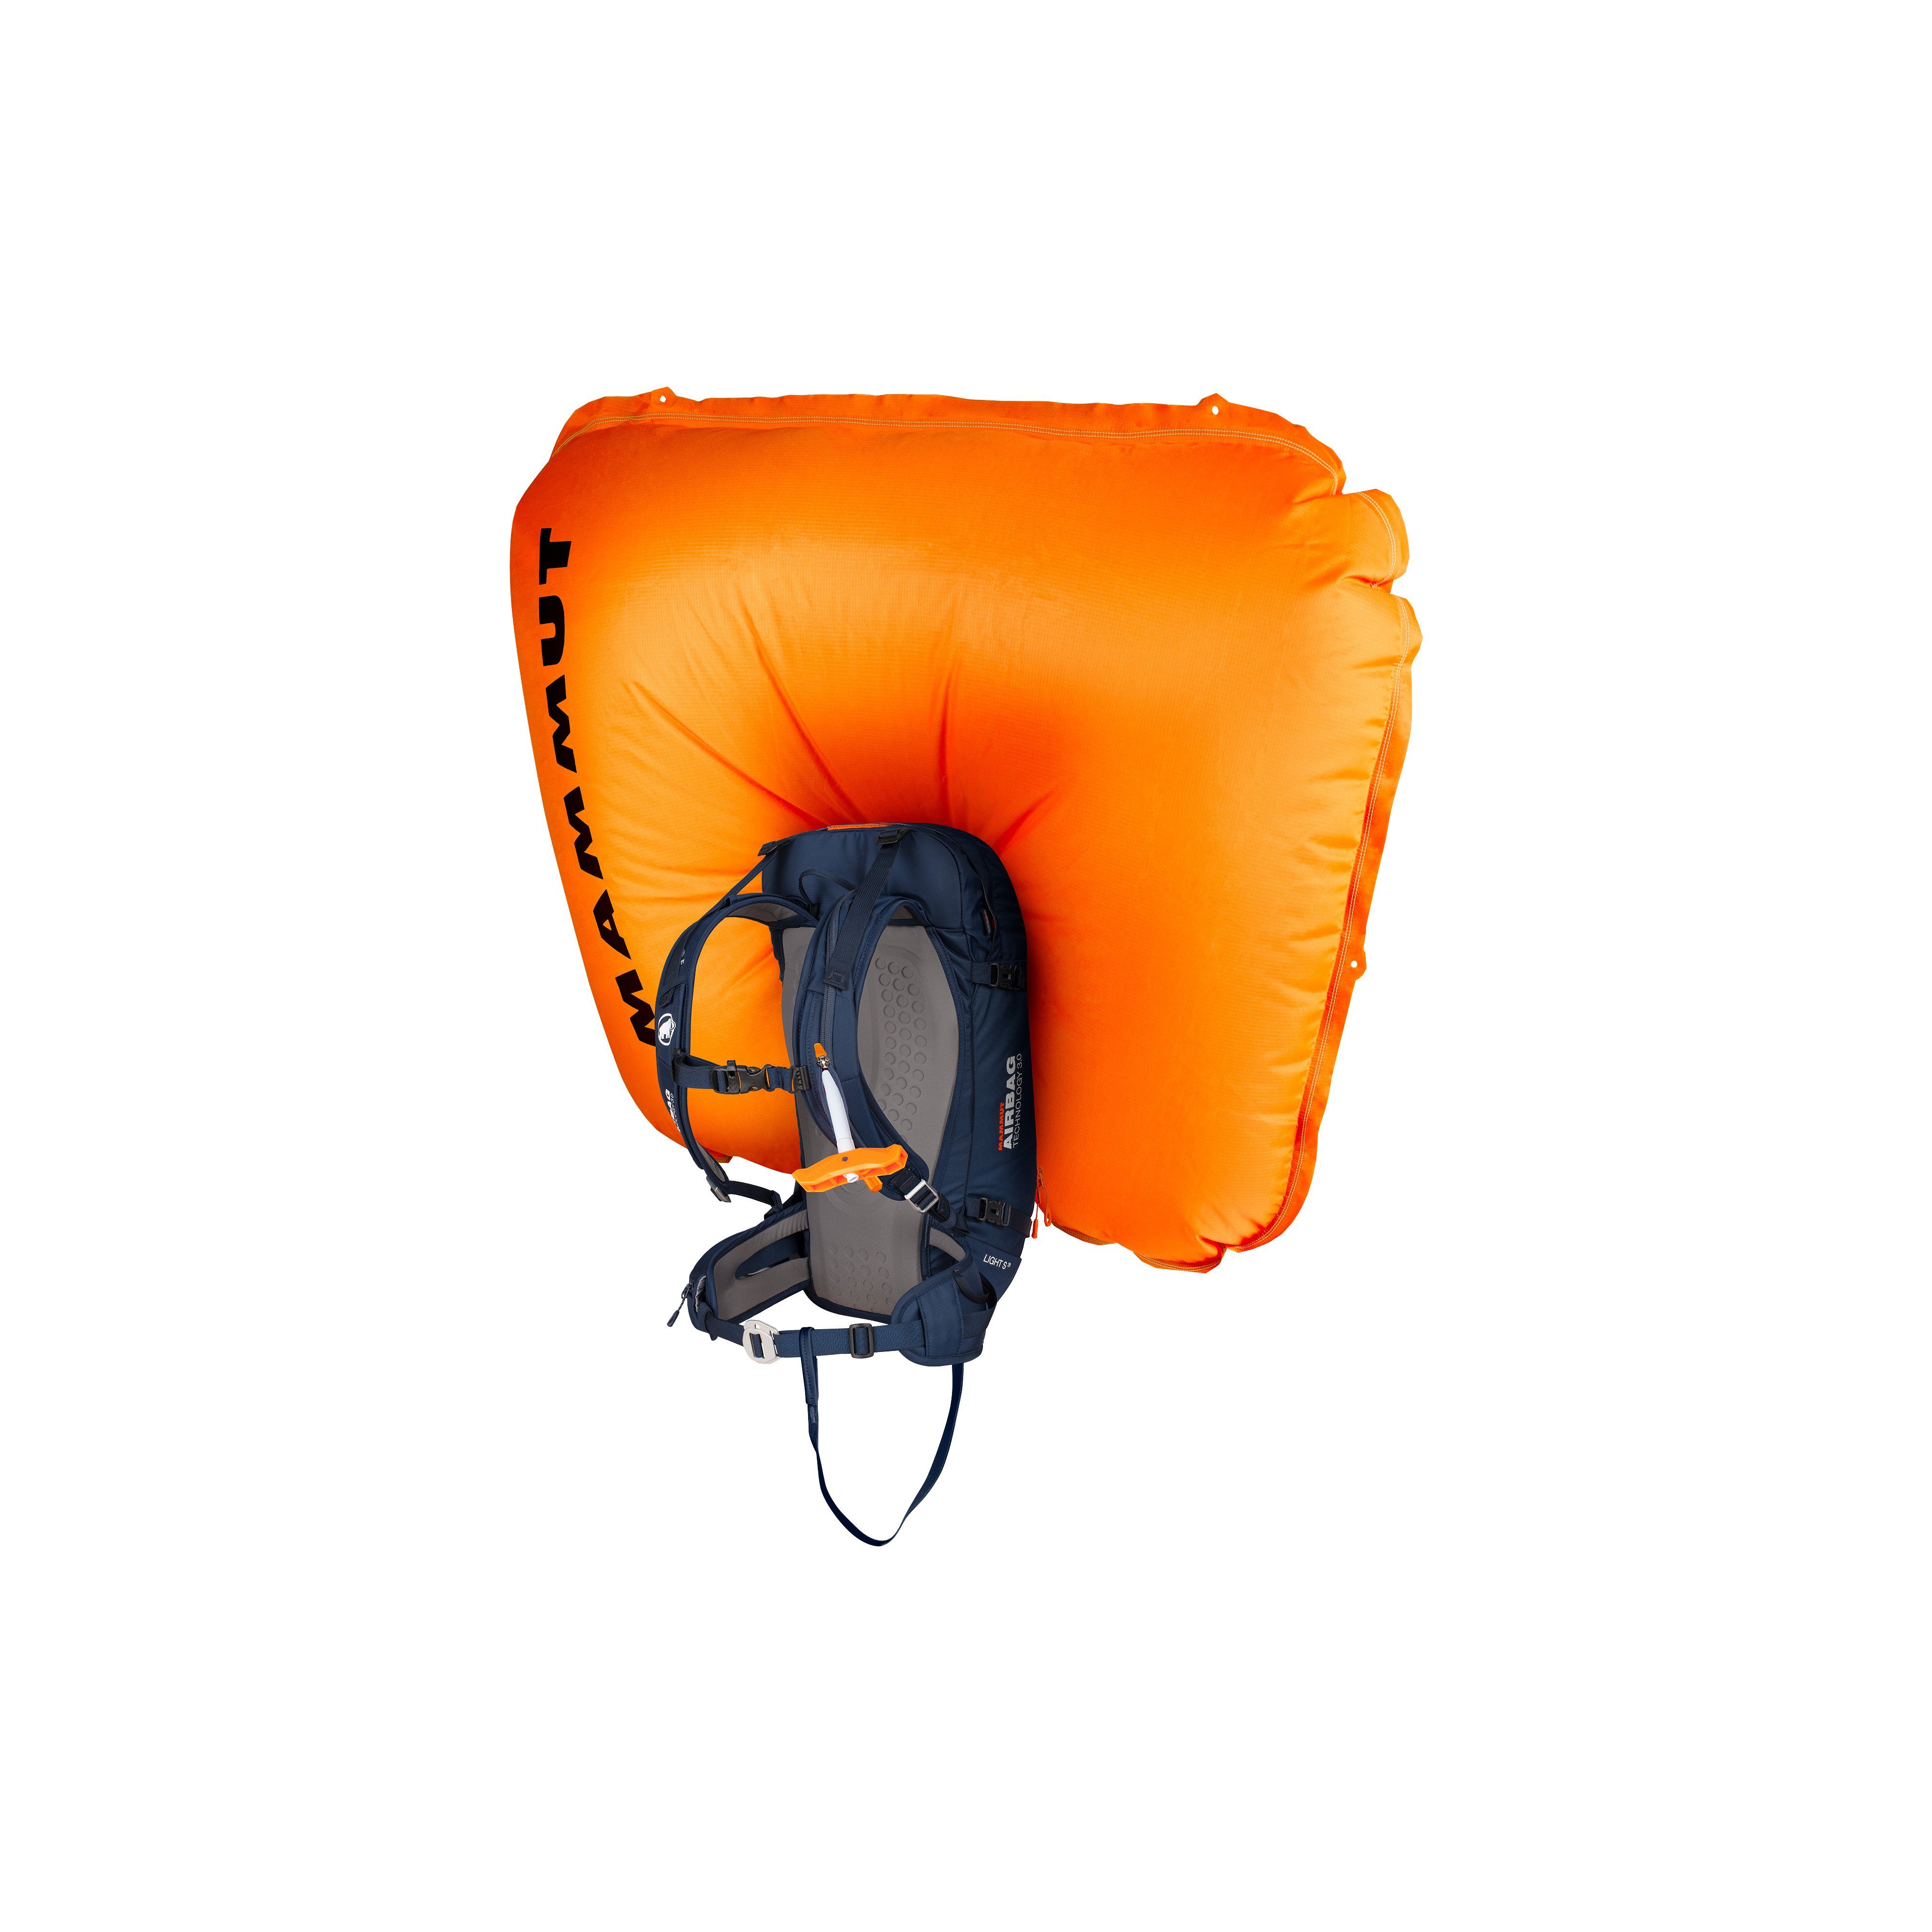 Light Short Removable Airbag 3.0 ready - night, 28 L product image